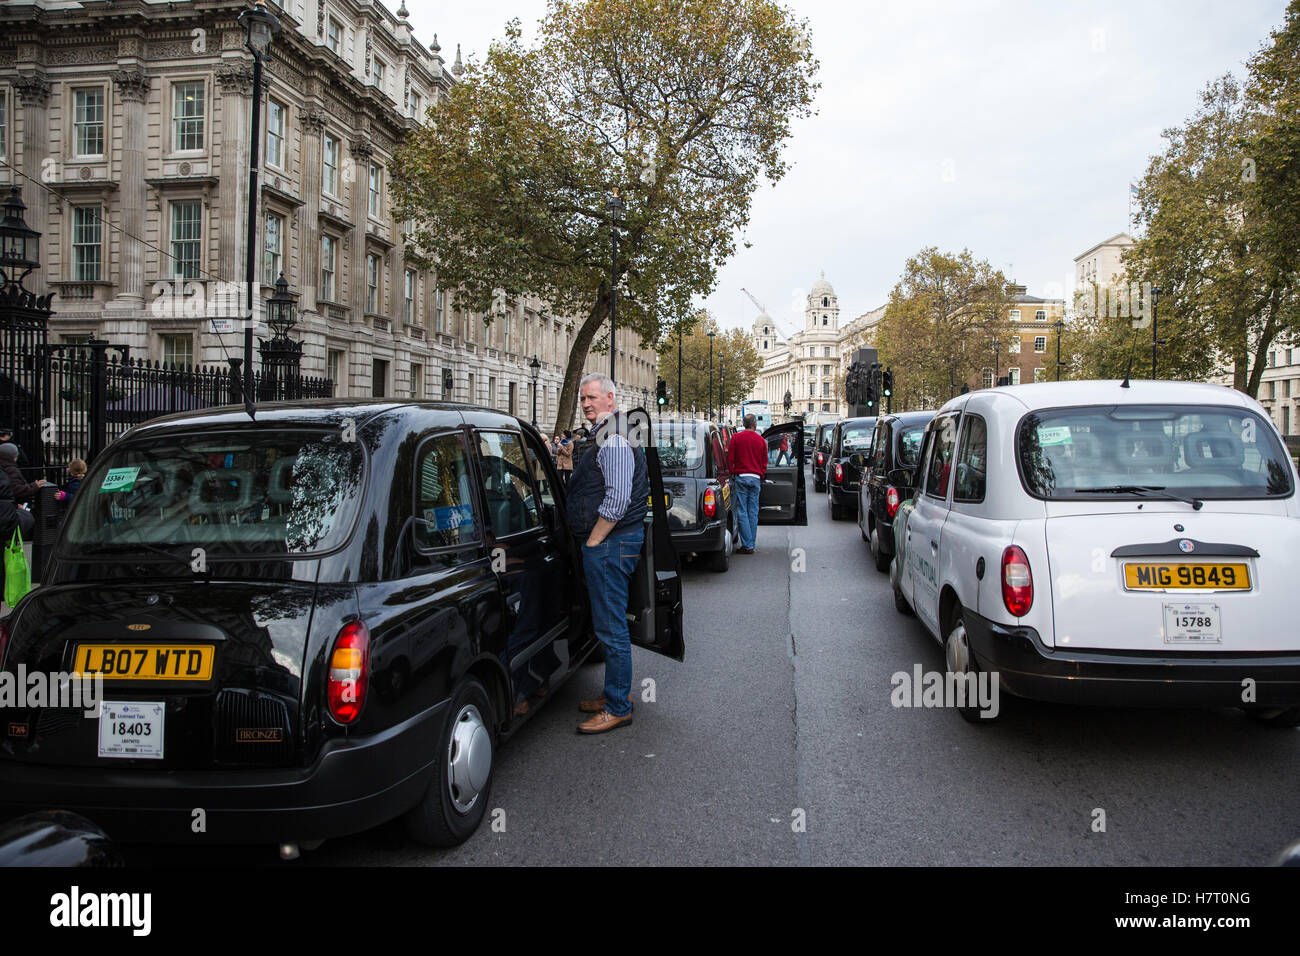 London, UK. 8th November, 2016. Black cab drivers representing the United Cabbies Group (UCG), London Cab Drivers Club and RMT block Whitehall as part of a protest intended to apply pressure on the Government to launch a public inquiry into Transport for London’s (TfL) management of traffic and transport infrastructure and its failure to prevent congestion and increased pollution in London. Stock Photo